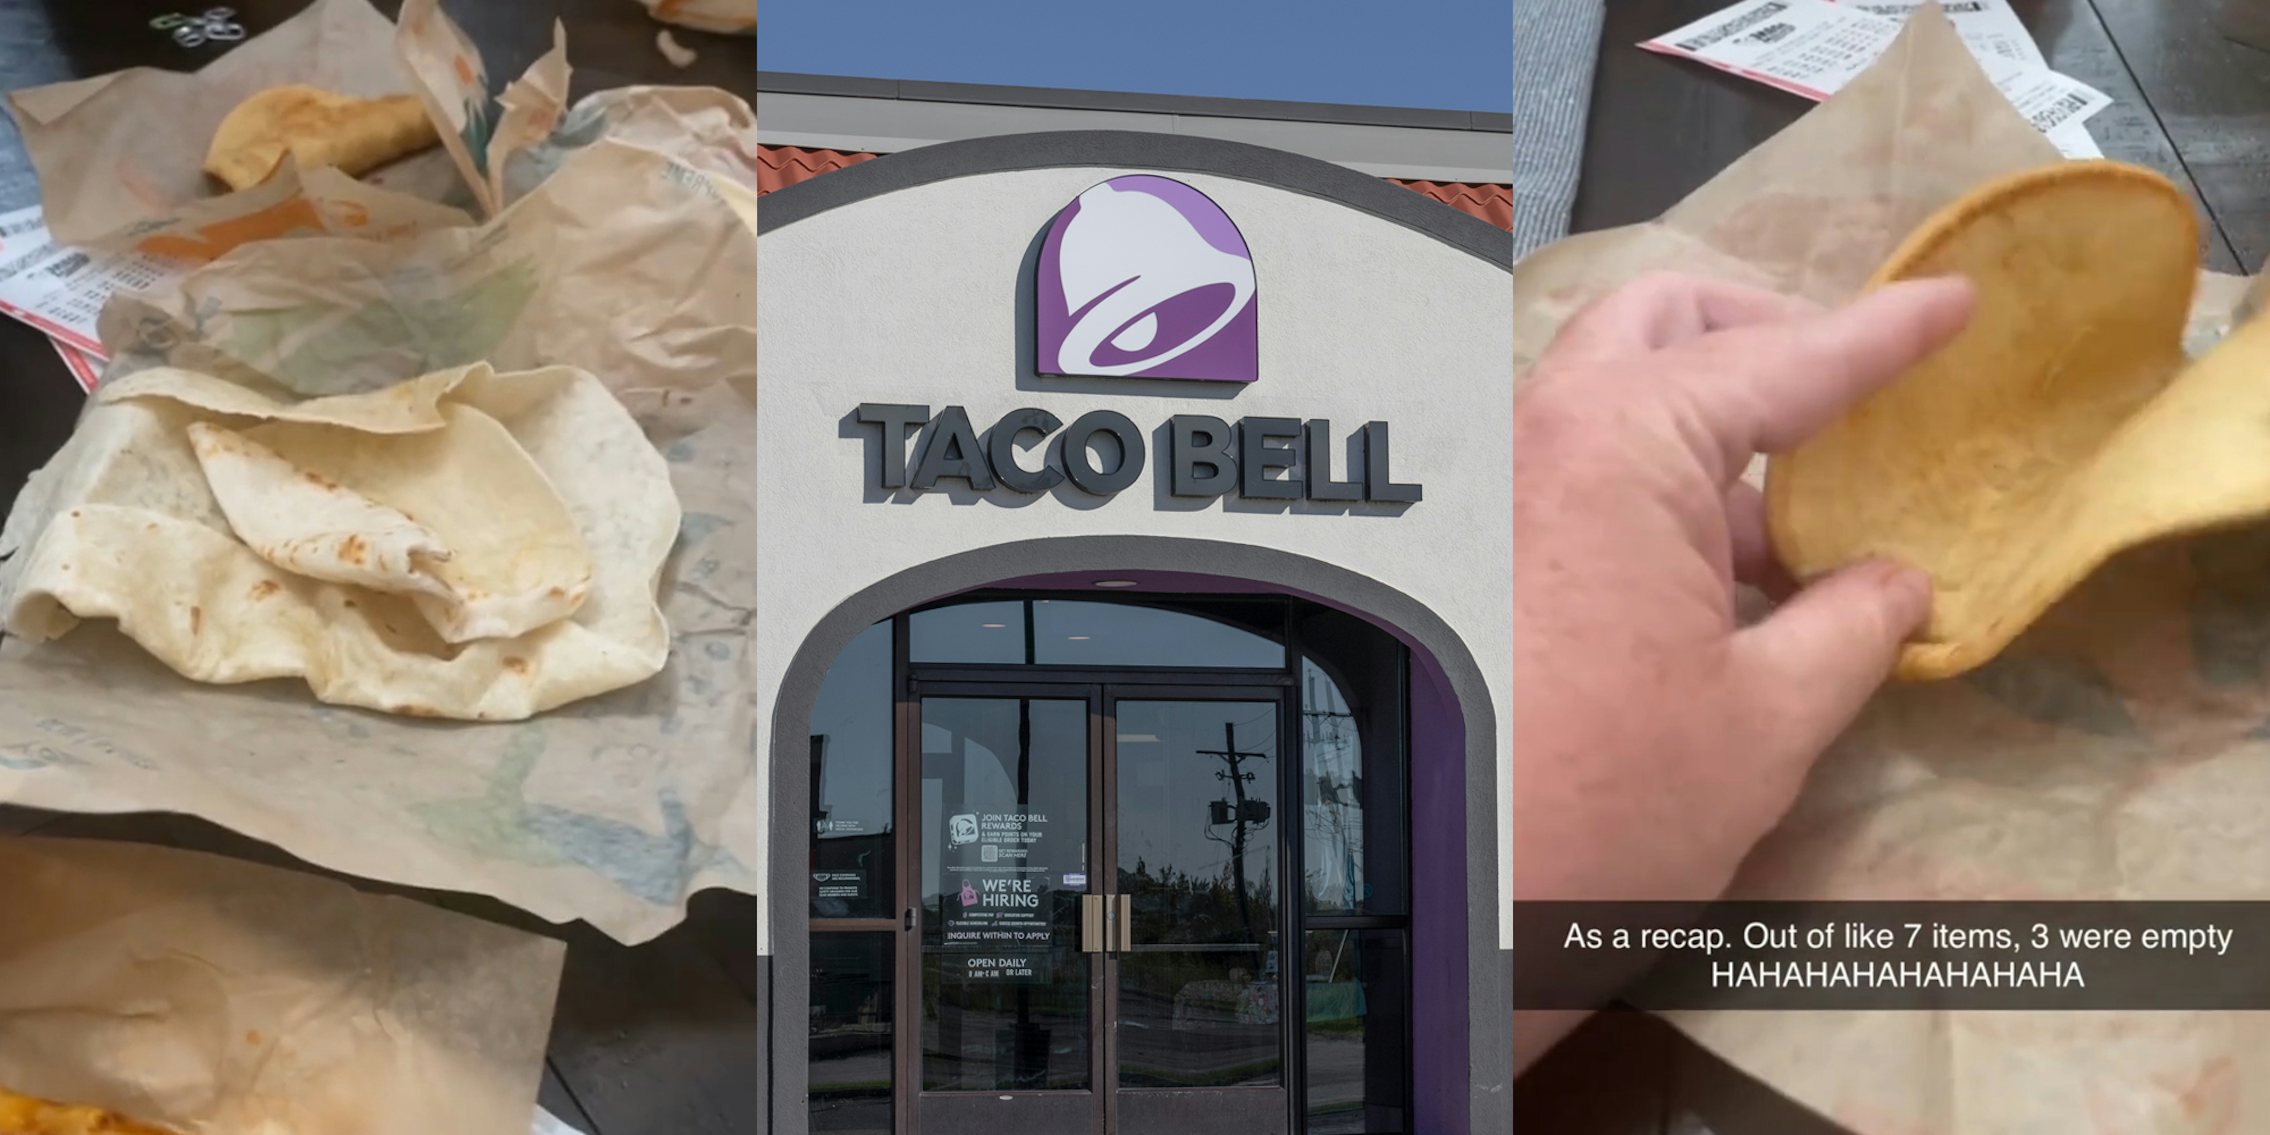 Taco Bell empty tortillas on table (l) Taco Bell entrance with sign (c) Taco Bell shell with nothing inside on table with caption 'As a recap. Out of 7 items, 3 were empty HAHAHAHAHAHA' (r)